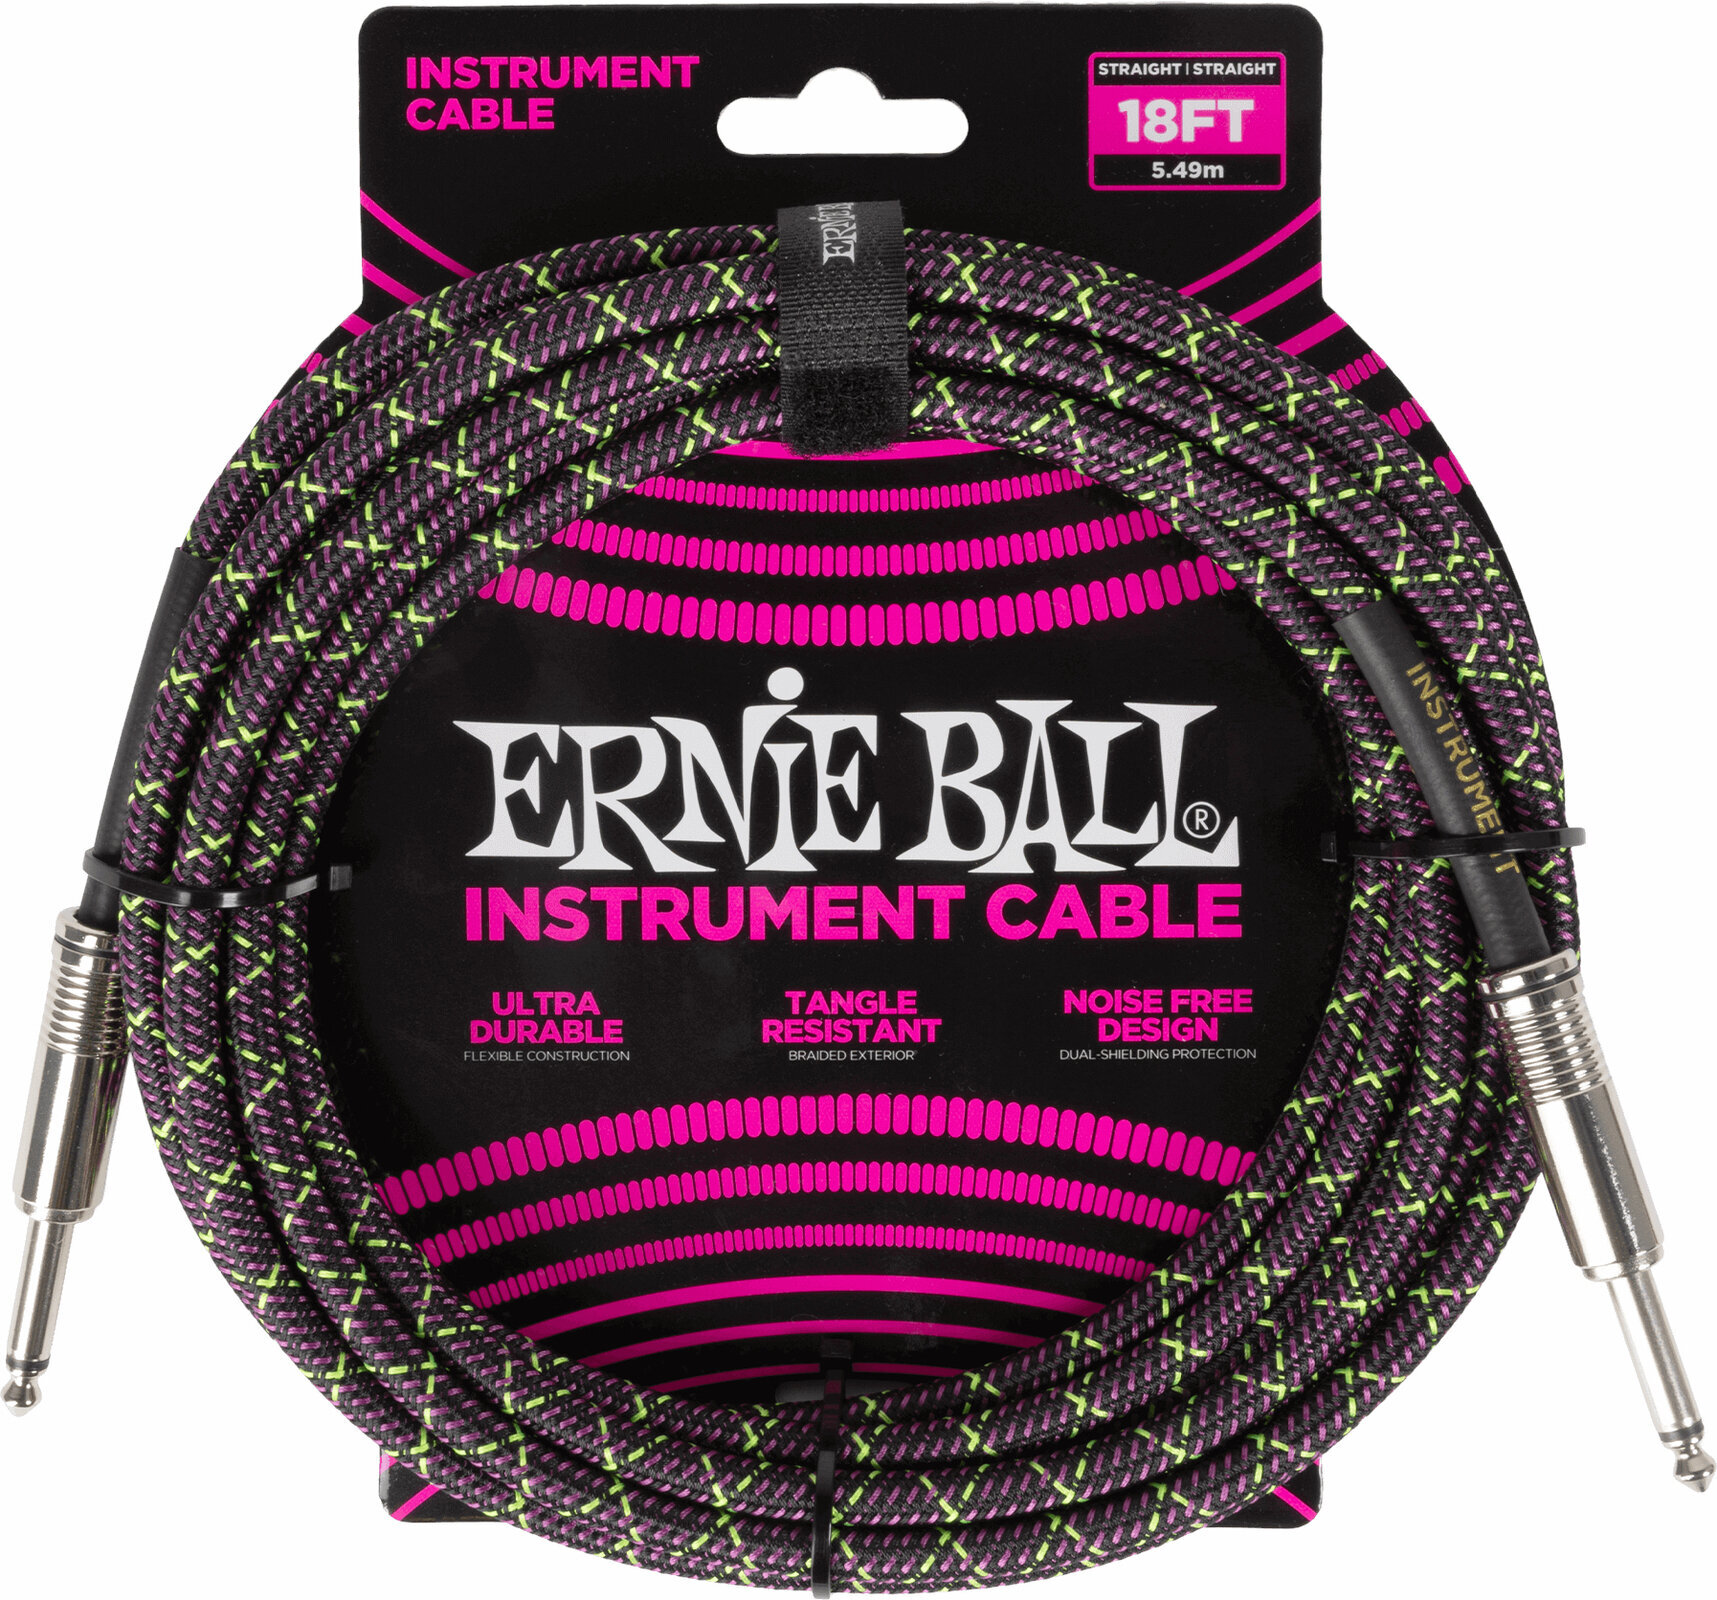 Instrument Cable Ernie Ball Braided Instrument Cable Straight/Straight Violet 5,5 m Straight - Straight